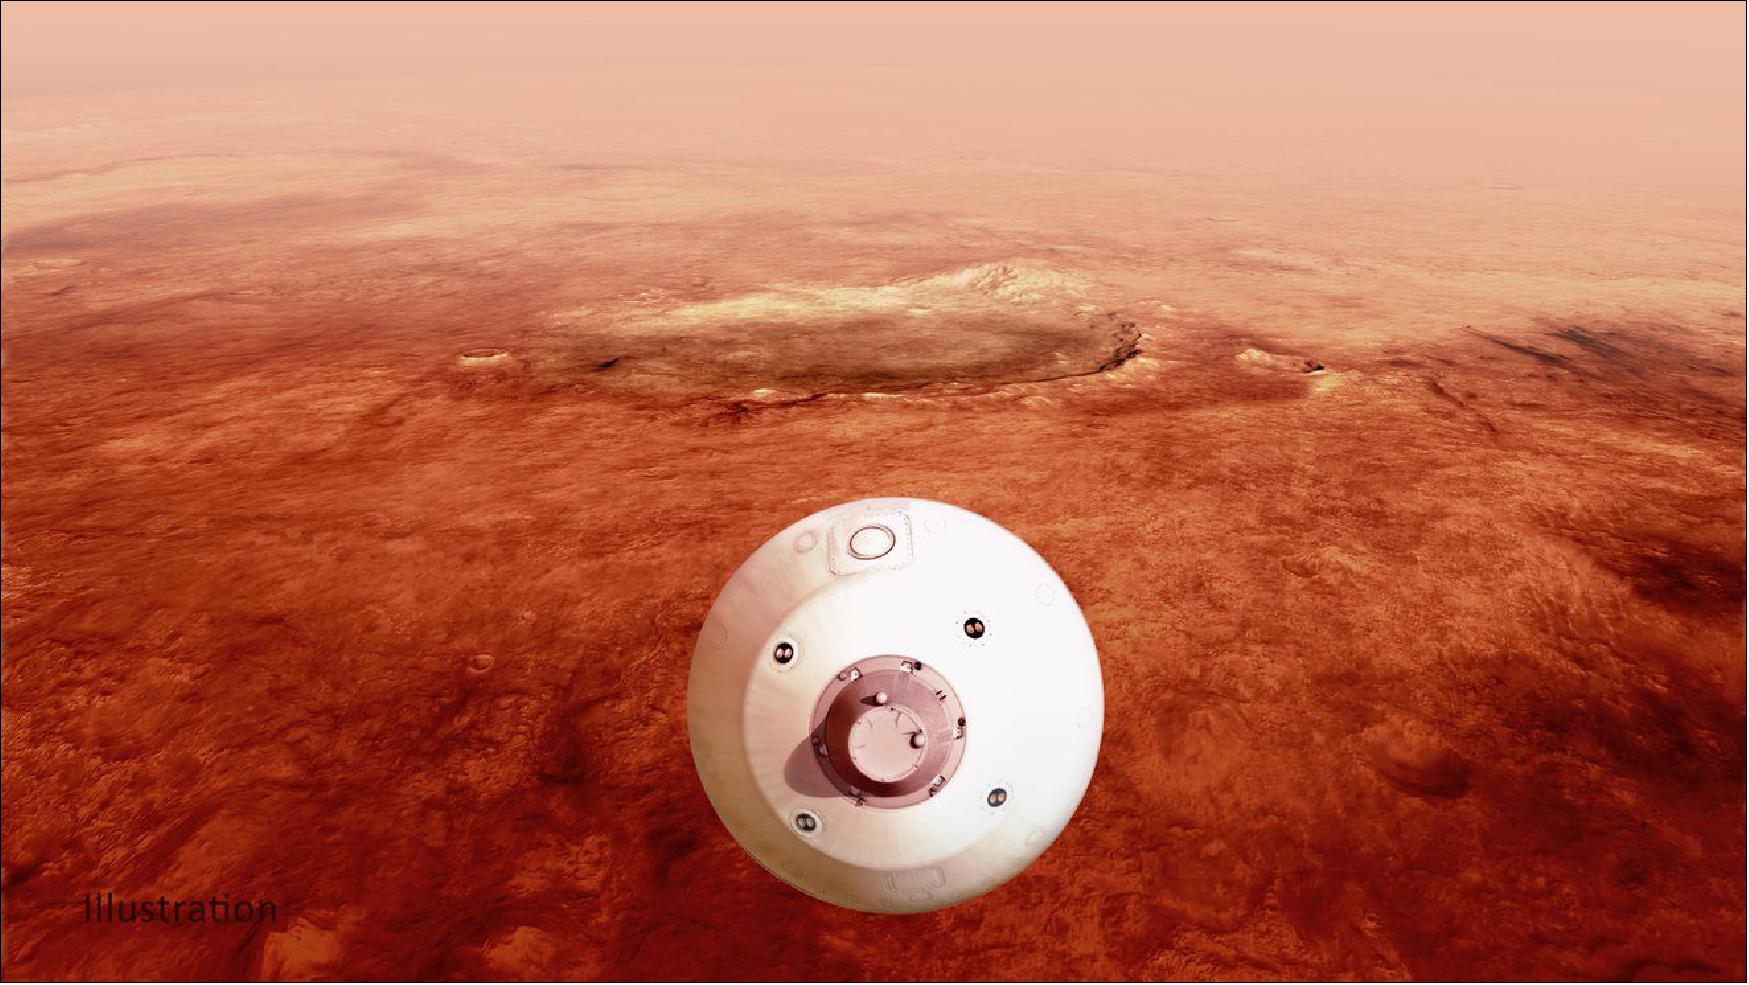 Figure 49: The aeroshell containing NASA's Perseverance rover guides itself toward the Martian surface as it descends through the atmosphere in this illustration. Hundreds of critical events must execute perfectly and exactly on time for the rover to land on Mars safely on Feb. 18, 2021. Full Image Details (image credit: NASA/JPL-Caltech)